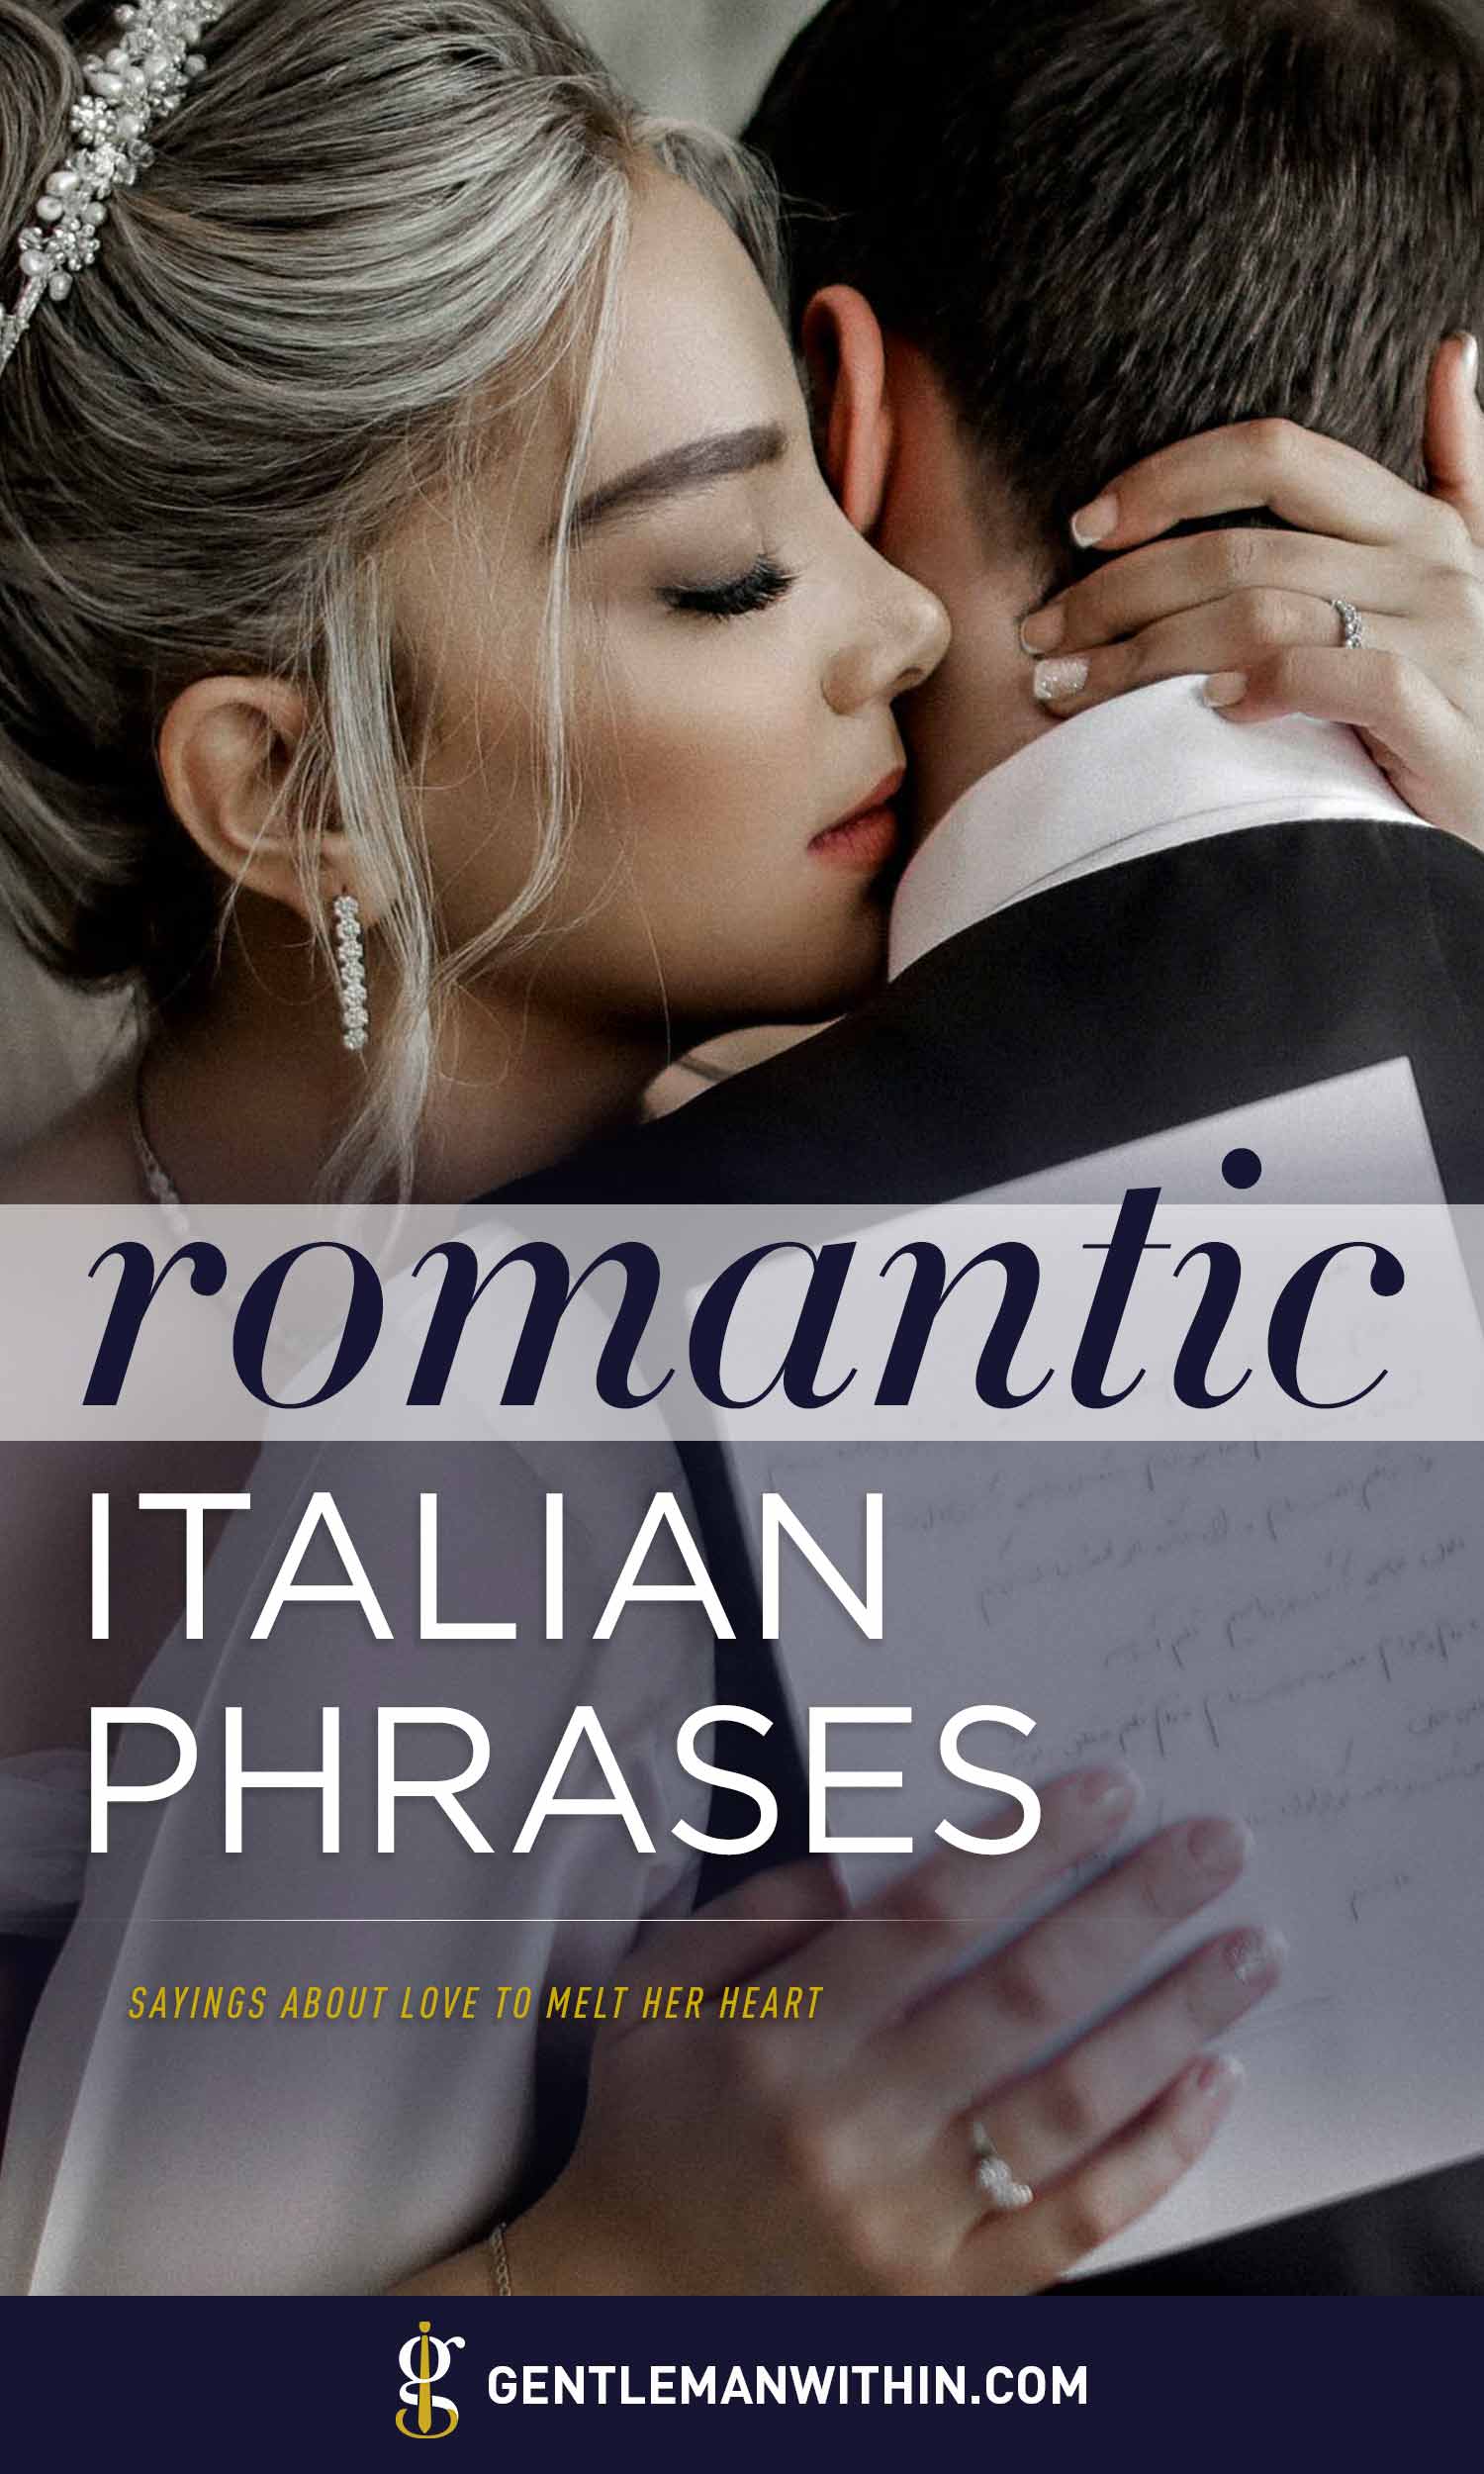 53 Italian Phrases About Love (Romantic Sayings to Melt Her Heart)